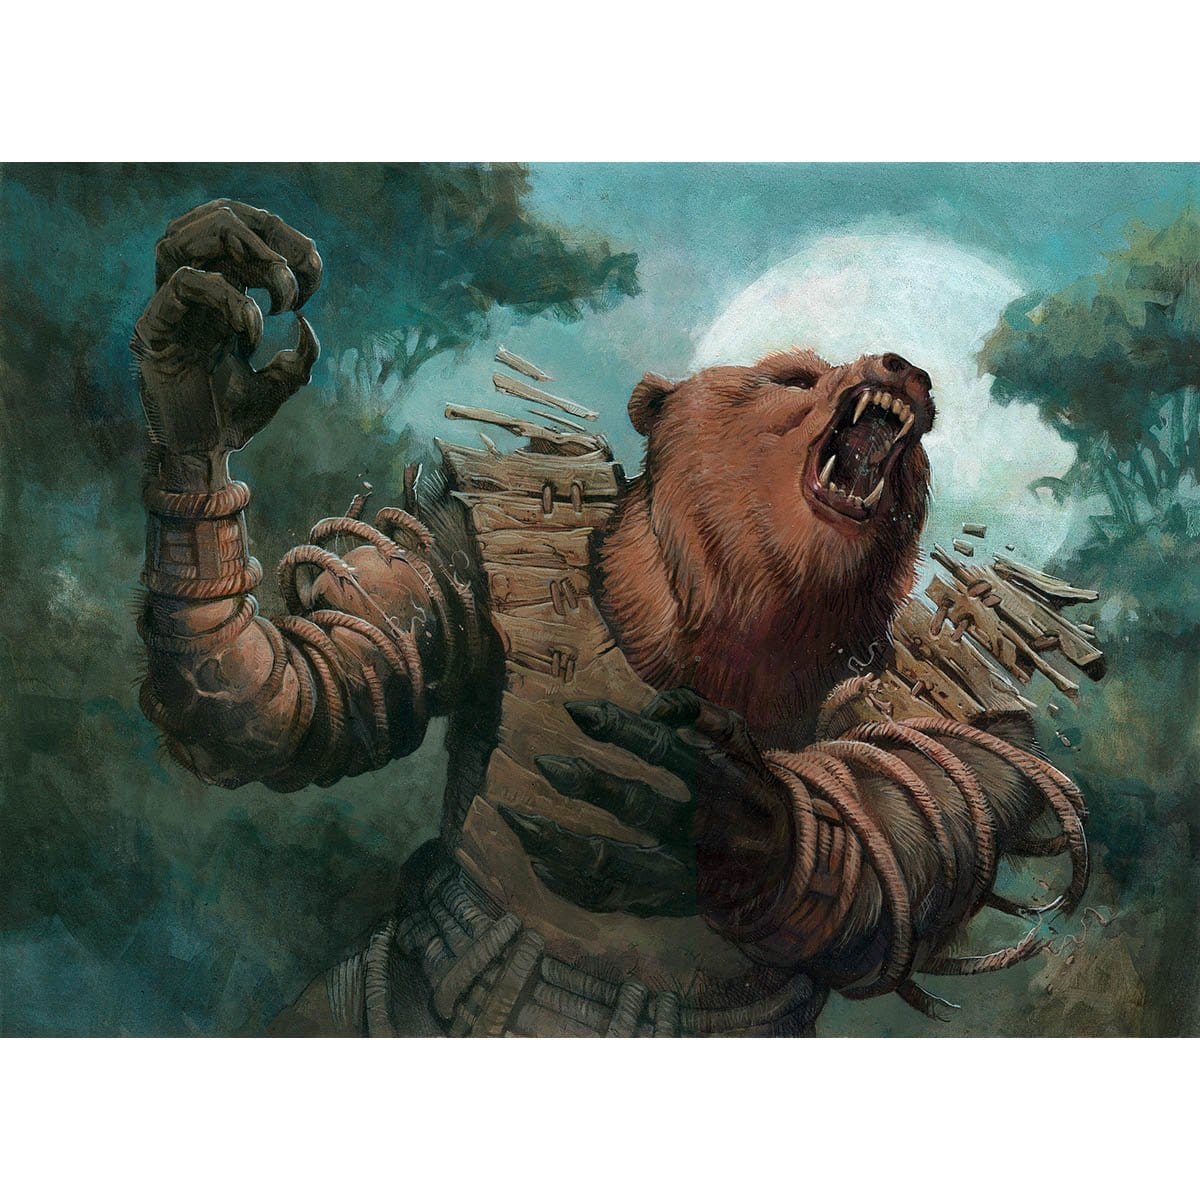 Werebear Print - Print - Original Magic Art - Accessories for Magic the Gathering and other card games